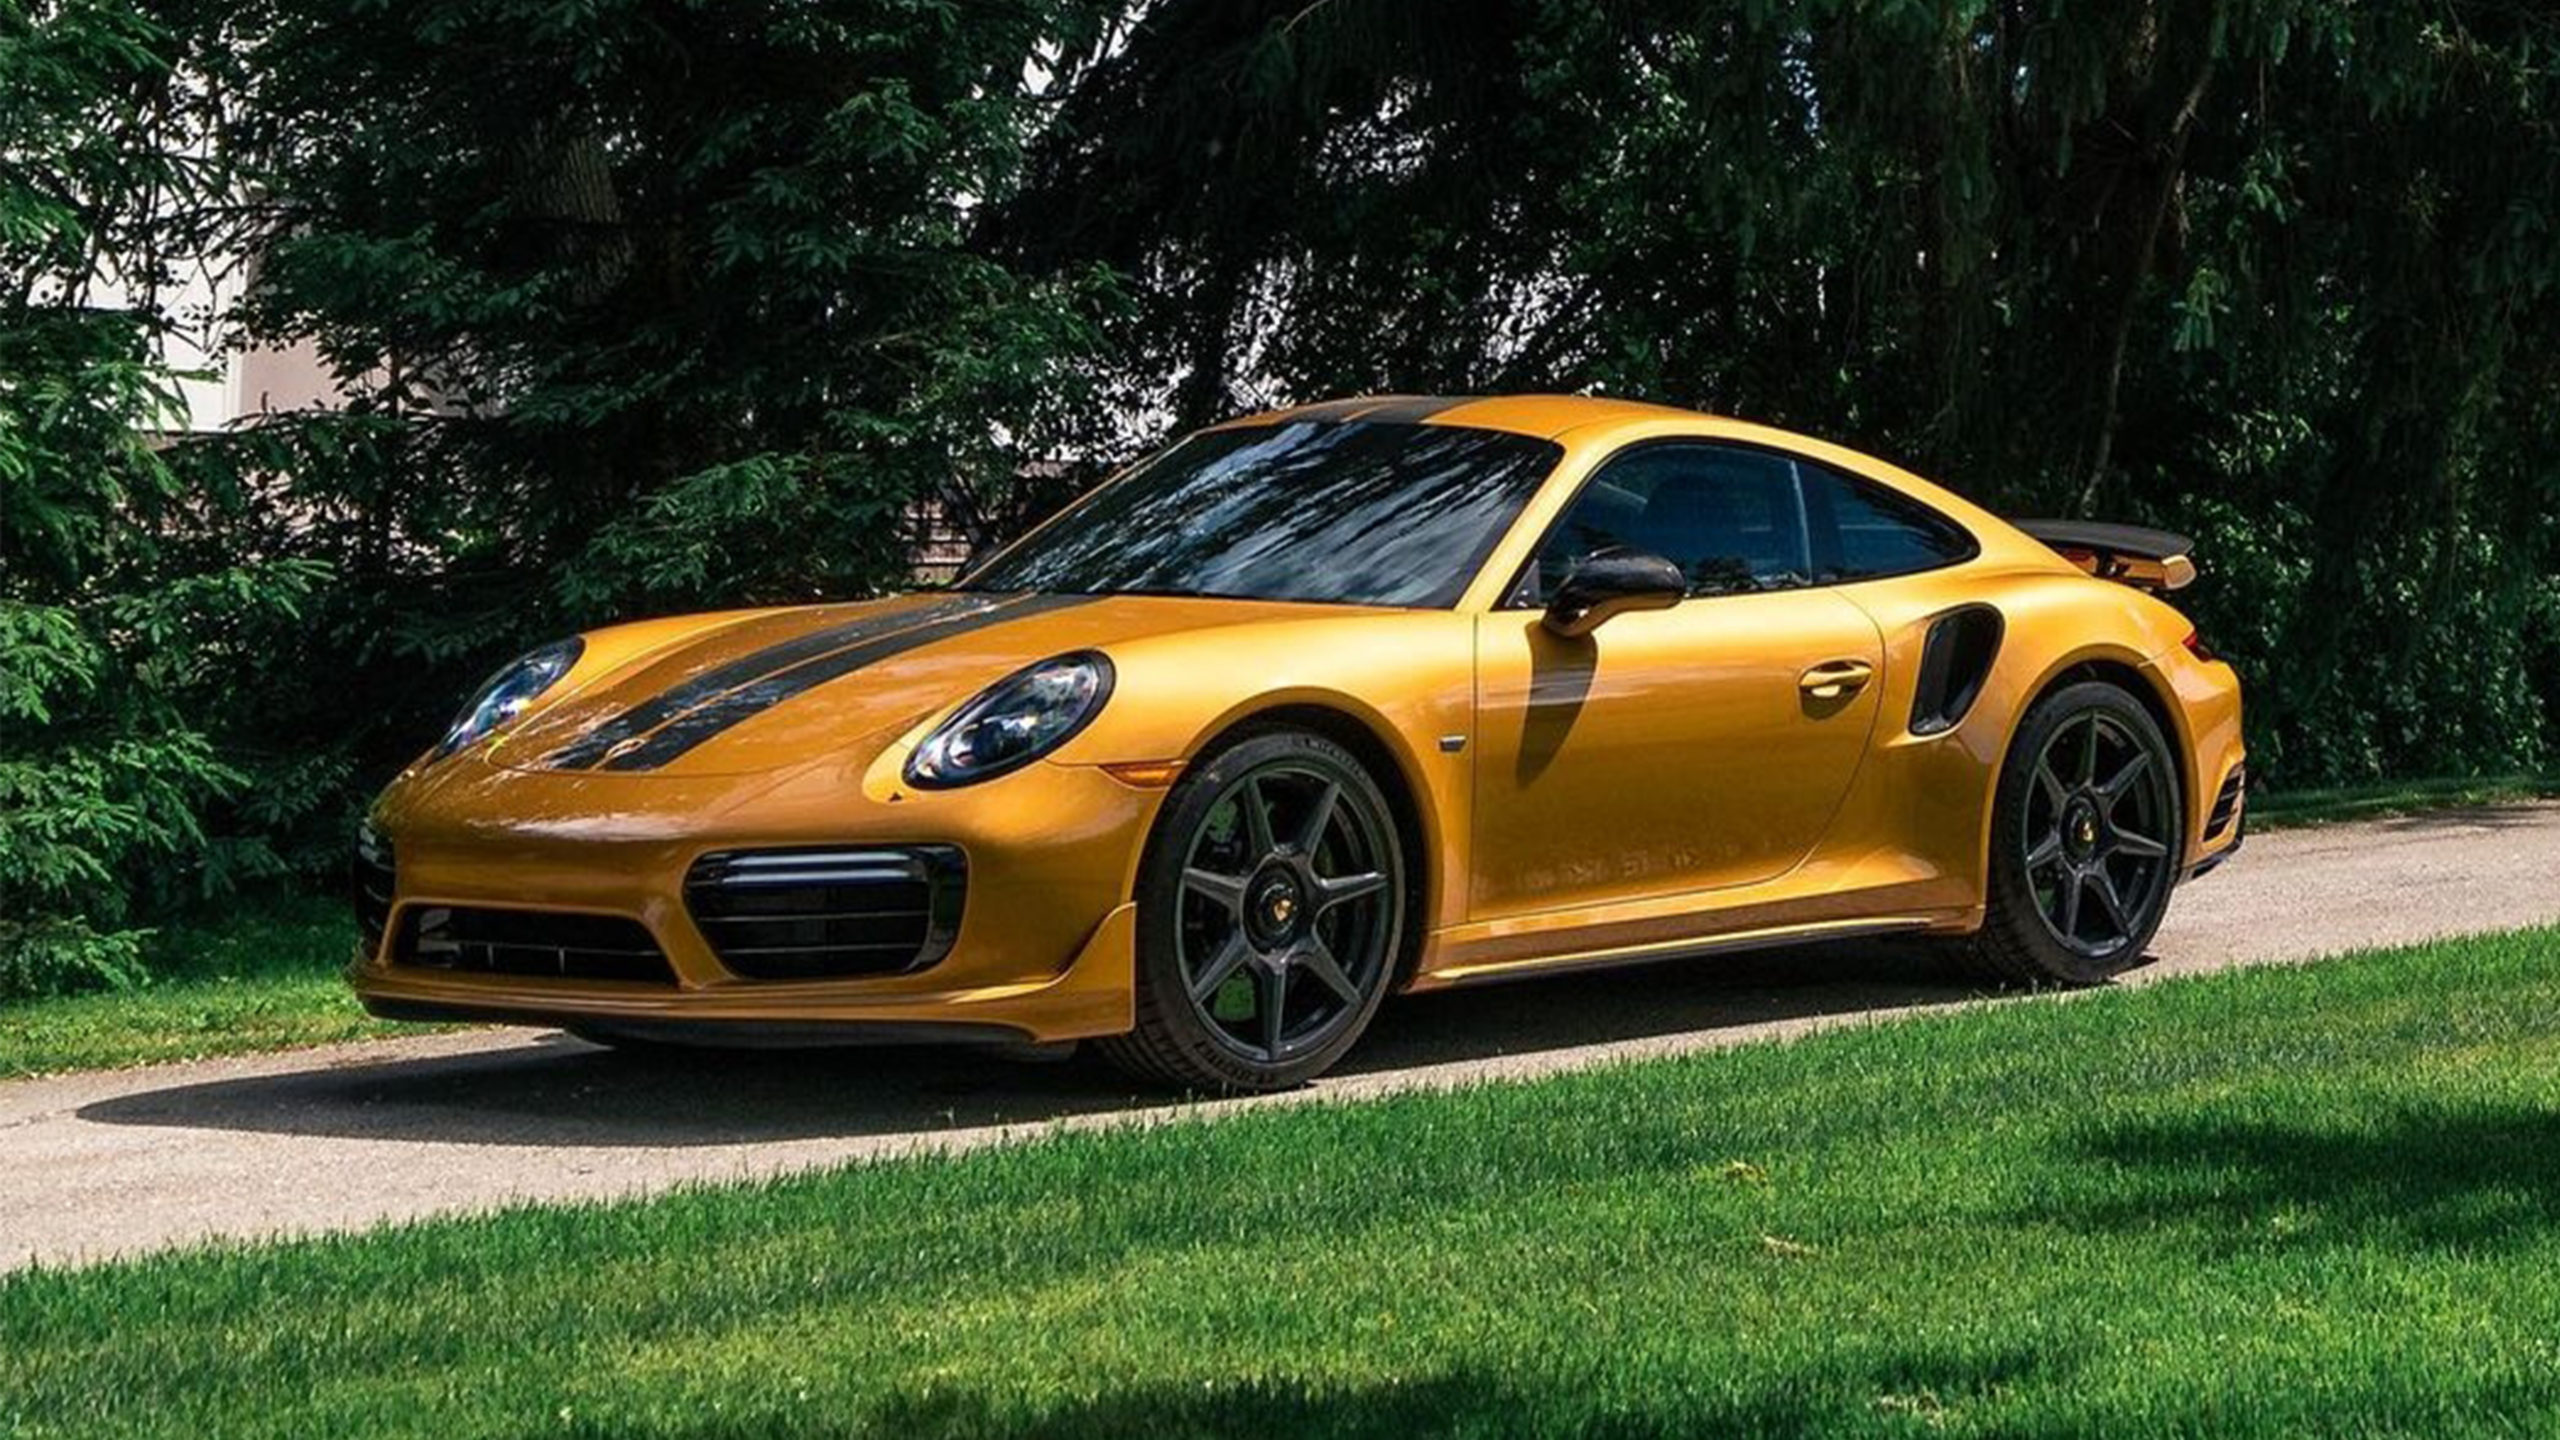 The 2018 Porsche 911 Turbo S Exclusive Series: A Rare and Golden Opportunity